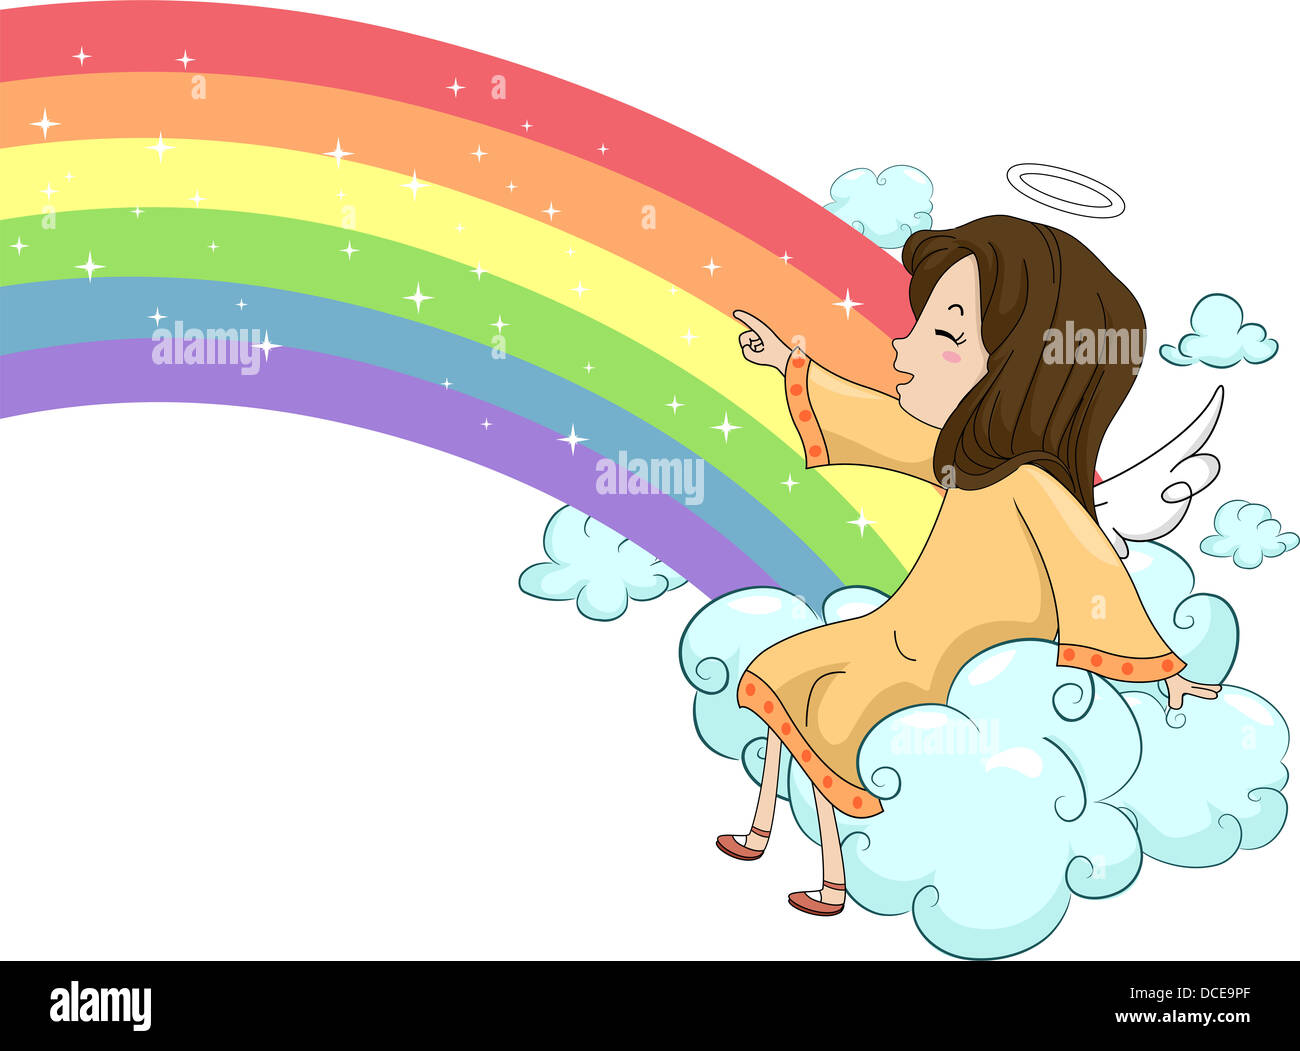 Illustration of a Laughing Girl Angel Sitting on a Cloud and Pointing on a Rainbow Stock Photo